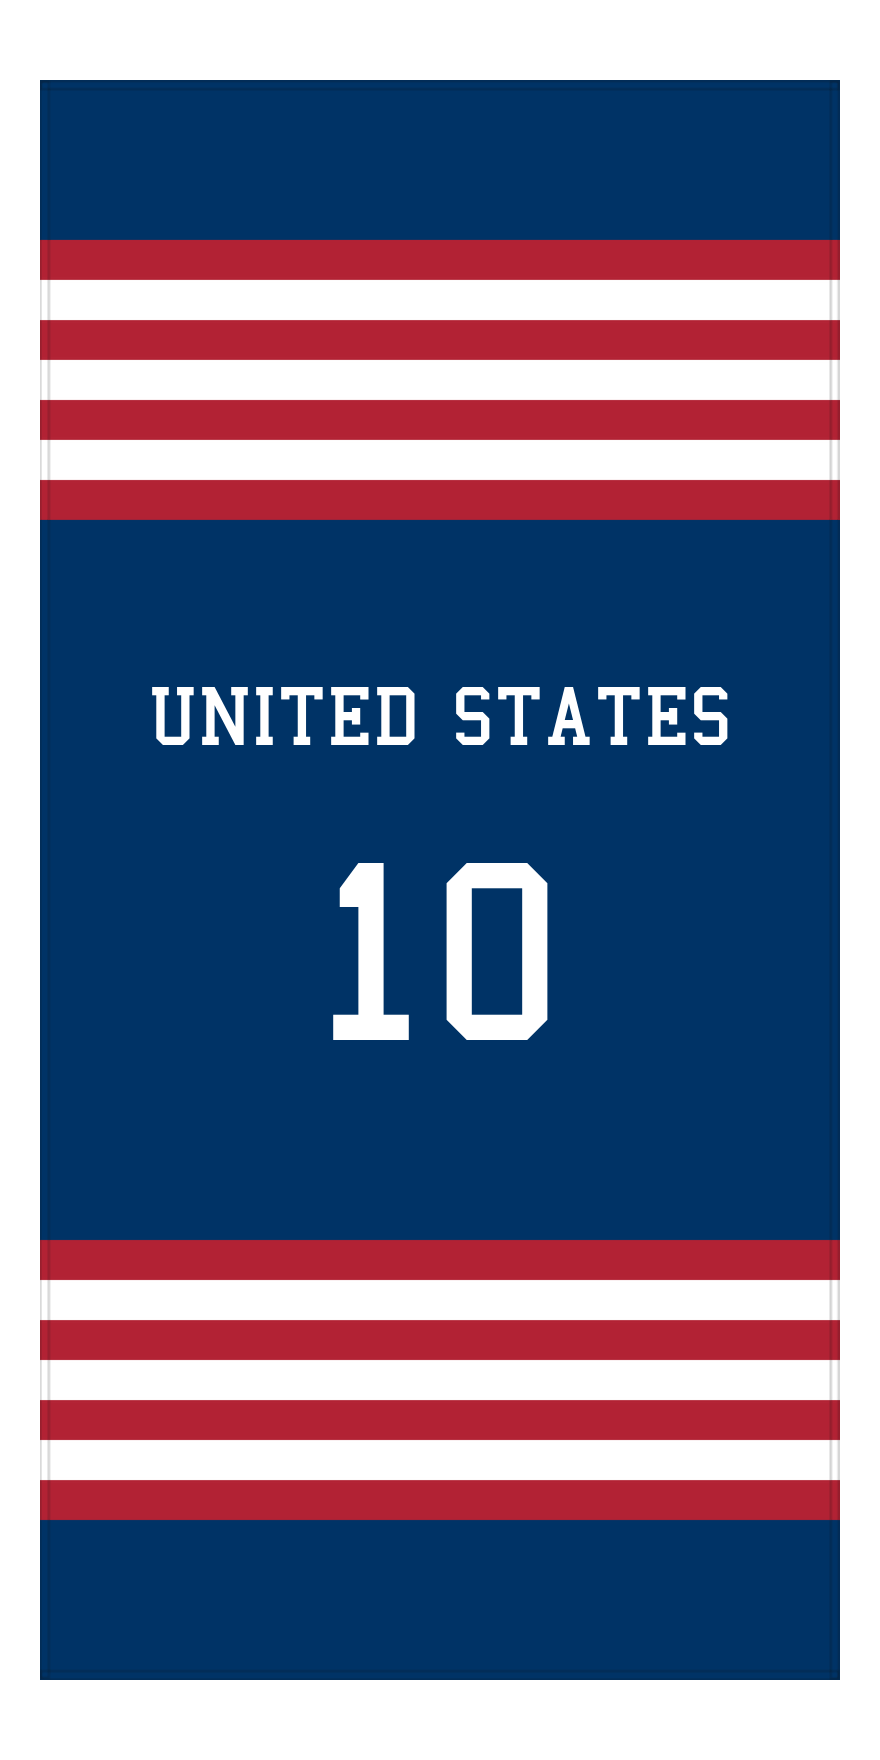 Personalized Jersey Number 3-on-1 Stripes Sports Beach Towel - United States - Vertical Design - Front View